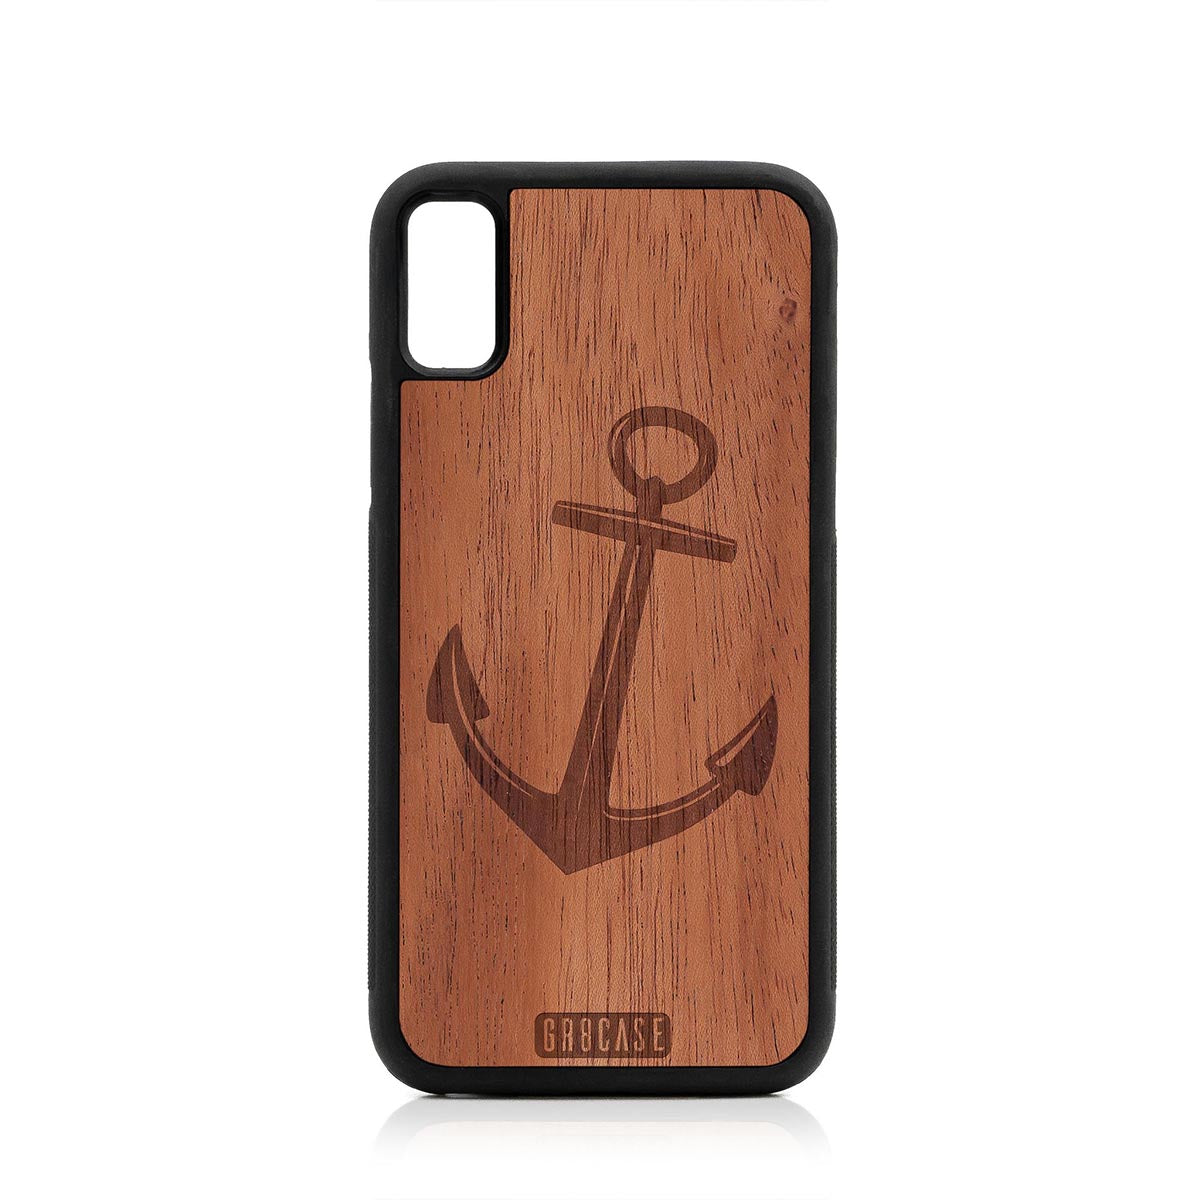 Anchor Design Wood Case For iPhone XR by GR8CASE